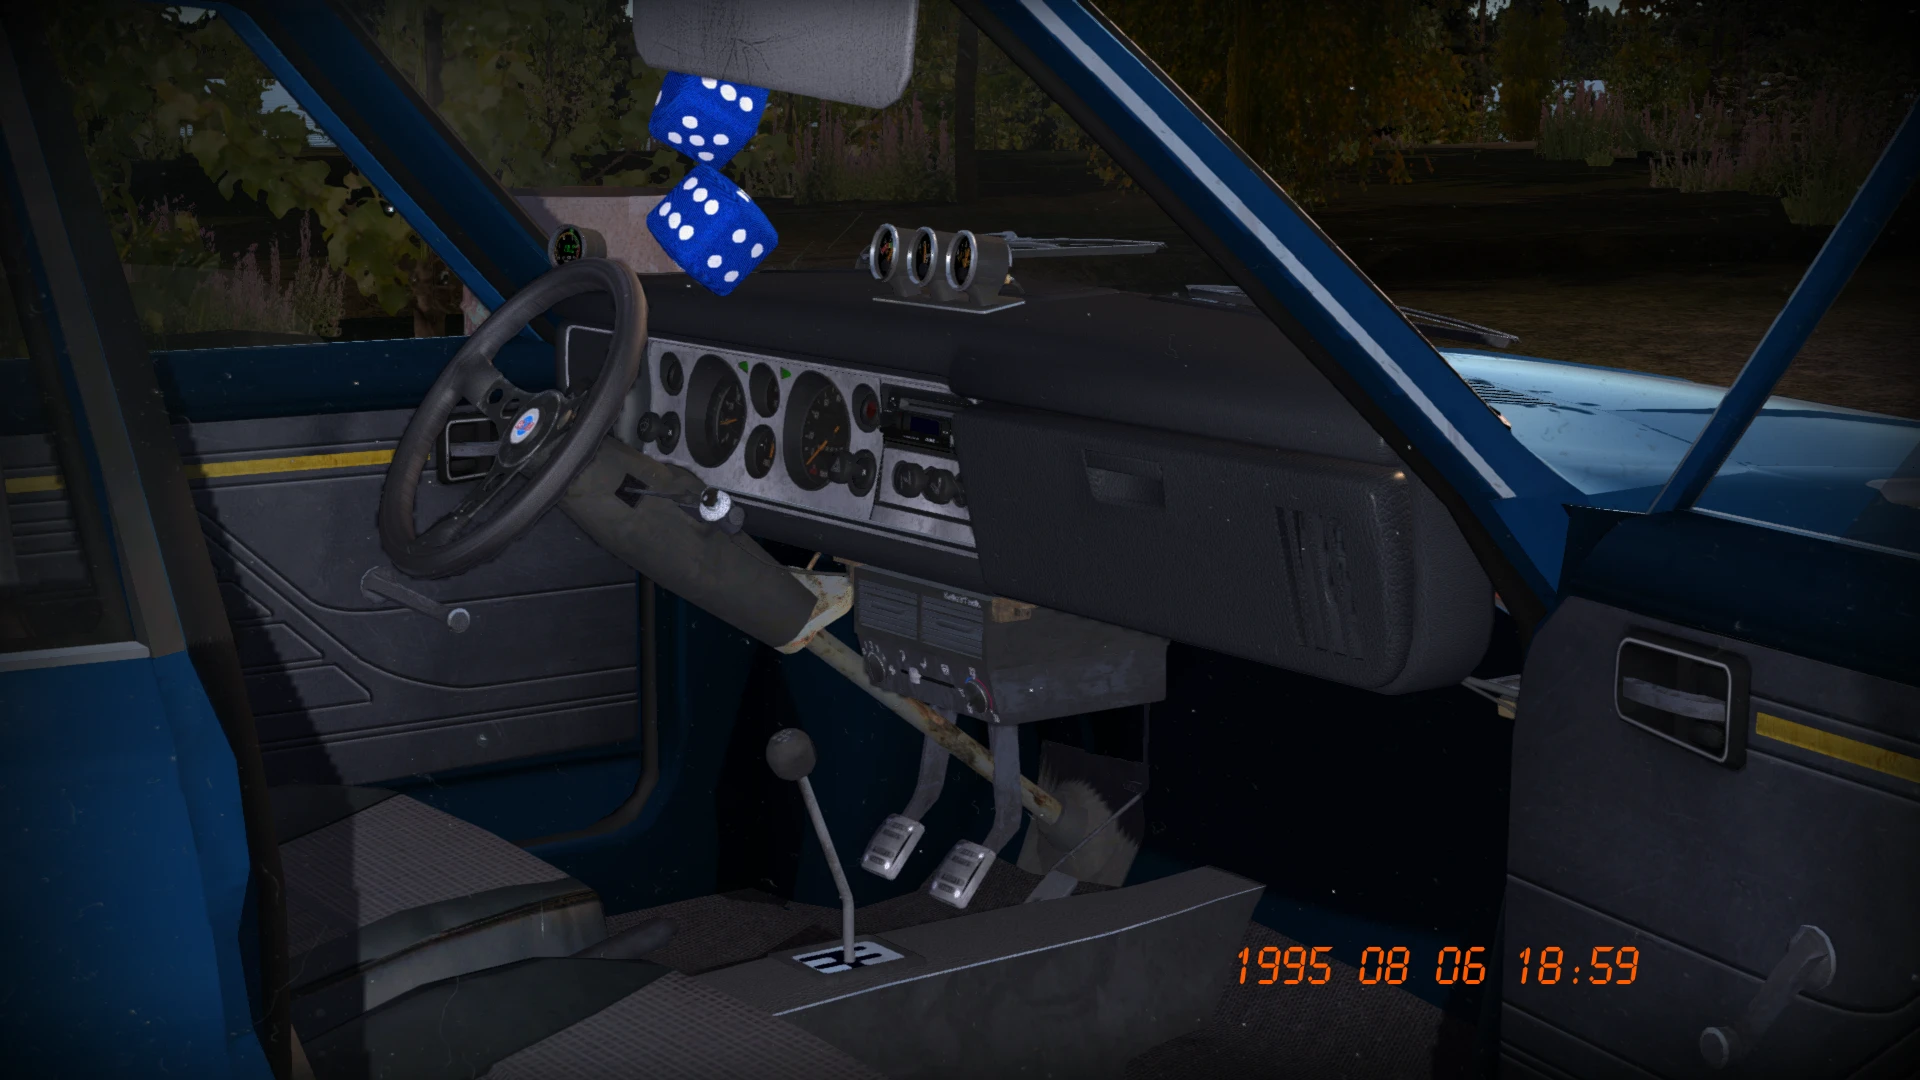 My Summer Car, Page 4